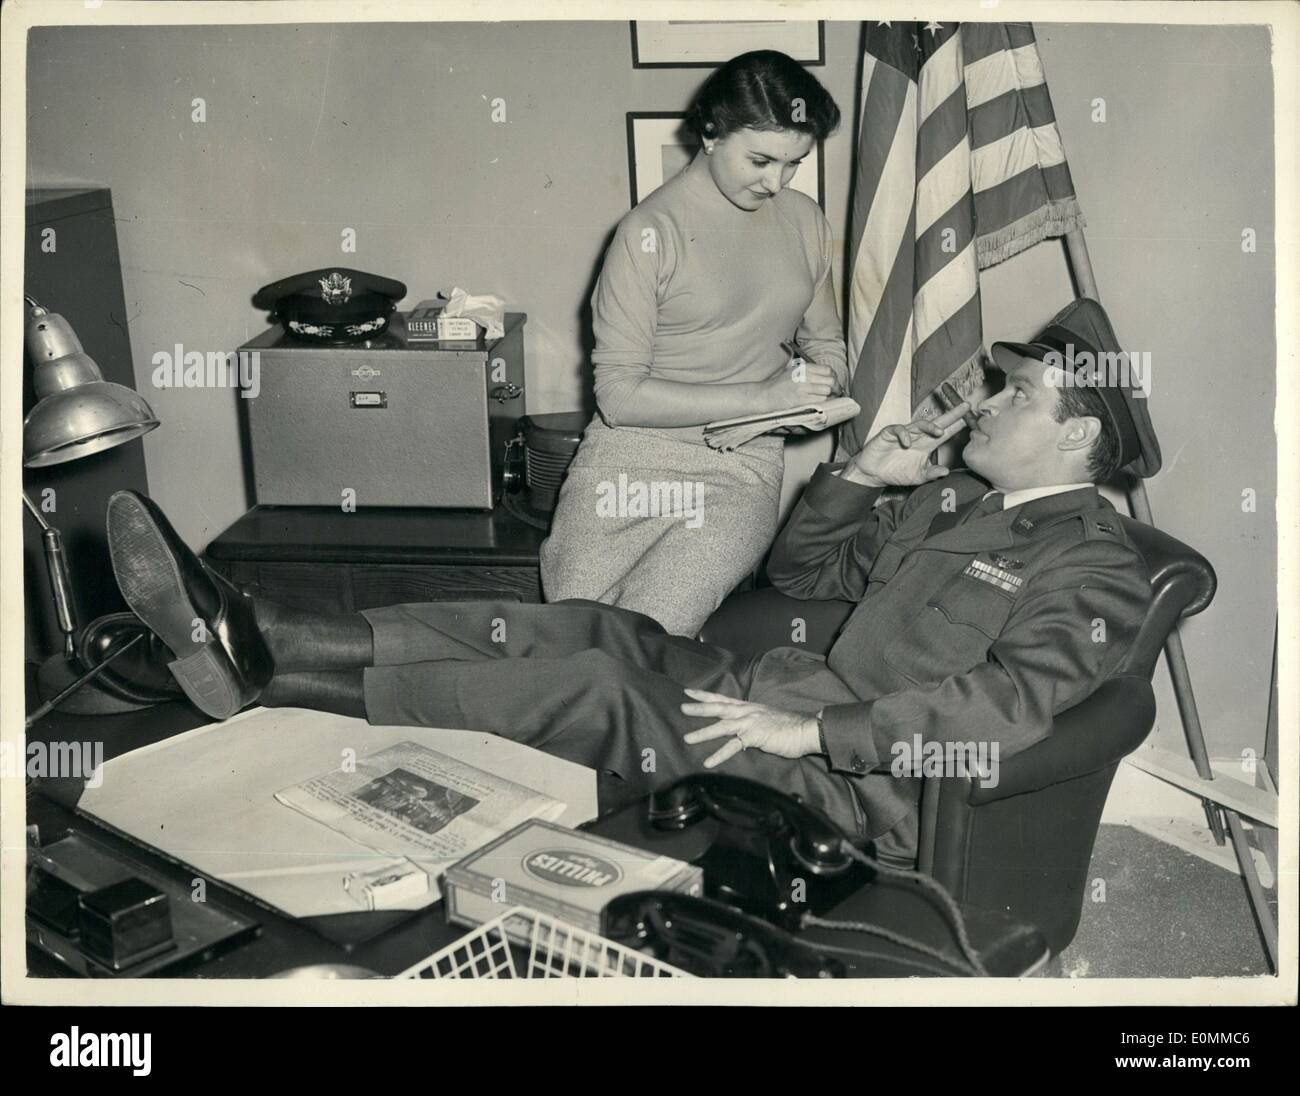 Dec. 12, 1955 - Bob Hope - Filming at Pinewood..''Not for Money'': Popular comedian Bob Hope in his role of an United States Air Forece Officer - dictates to Dorothy Livingstone - at Pinewood Studios - where he is making the new film ''Not for Money''..Bob says that parts of the new film call for scenes in Moscow - and he is hoping to obtain permission from the Soviet to visit that City to make the film shots. Stock Photo